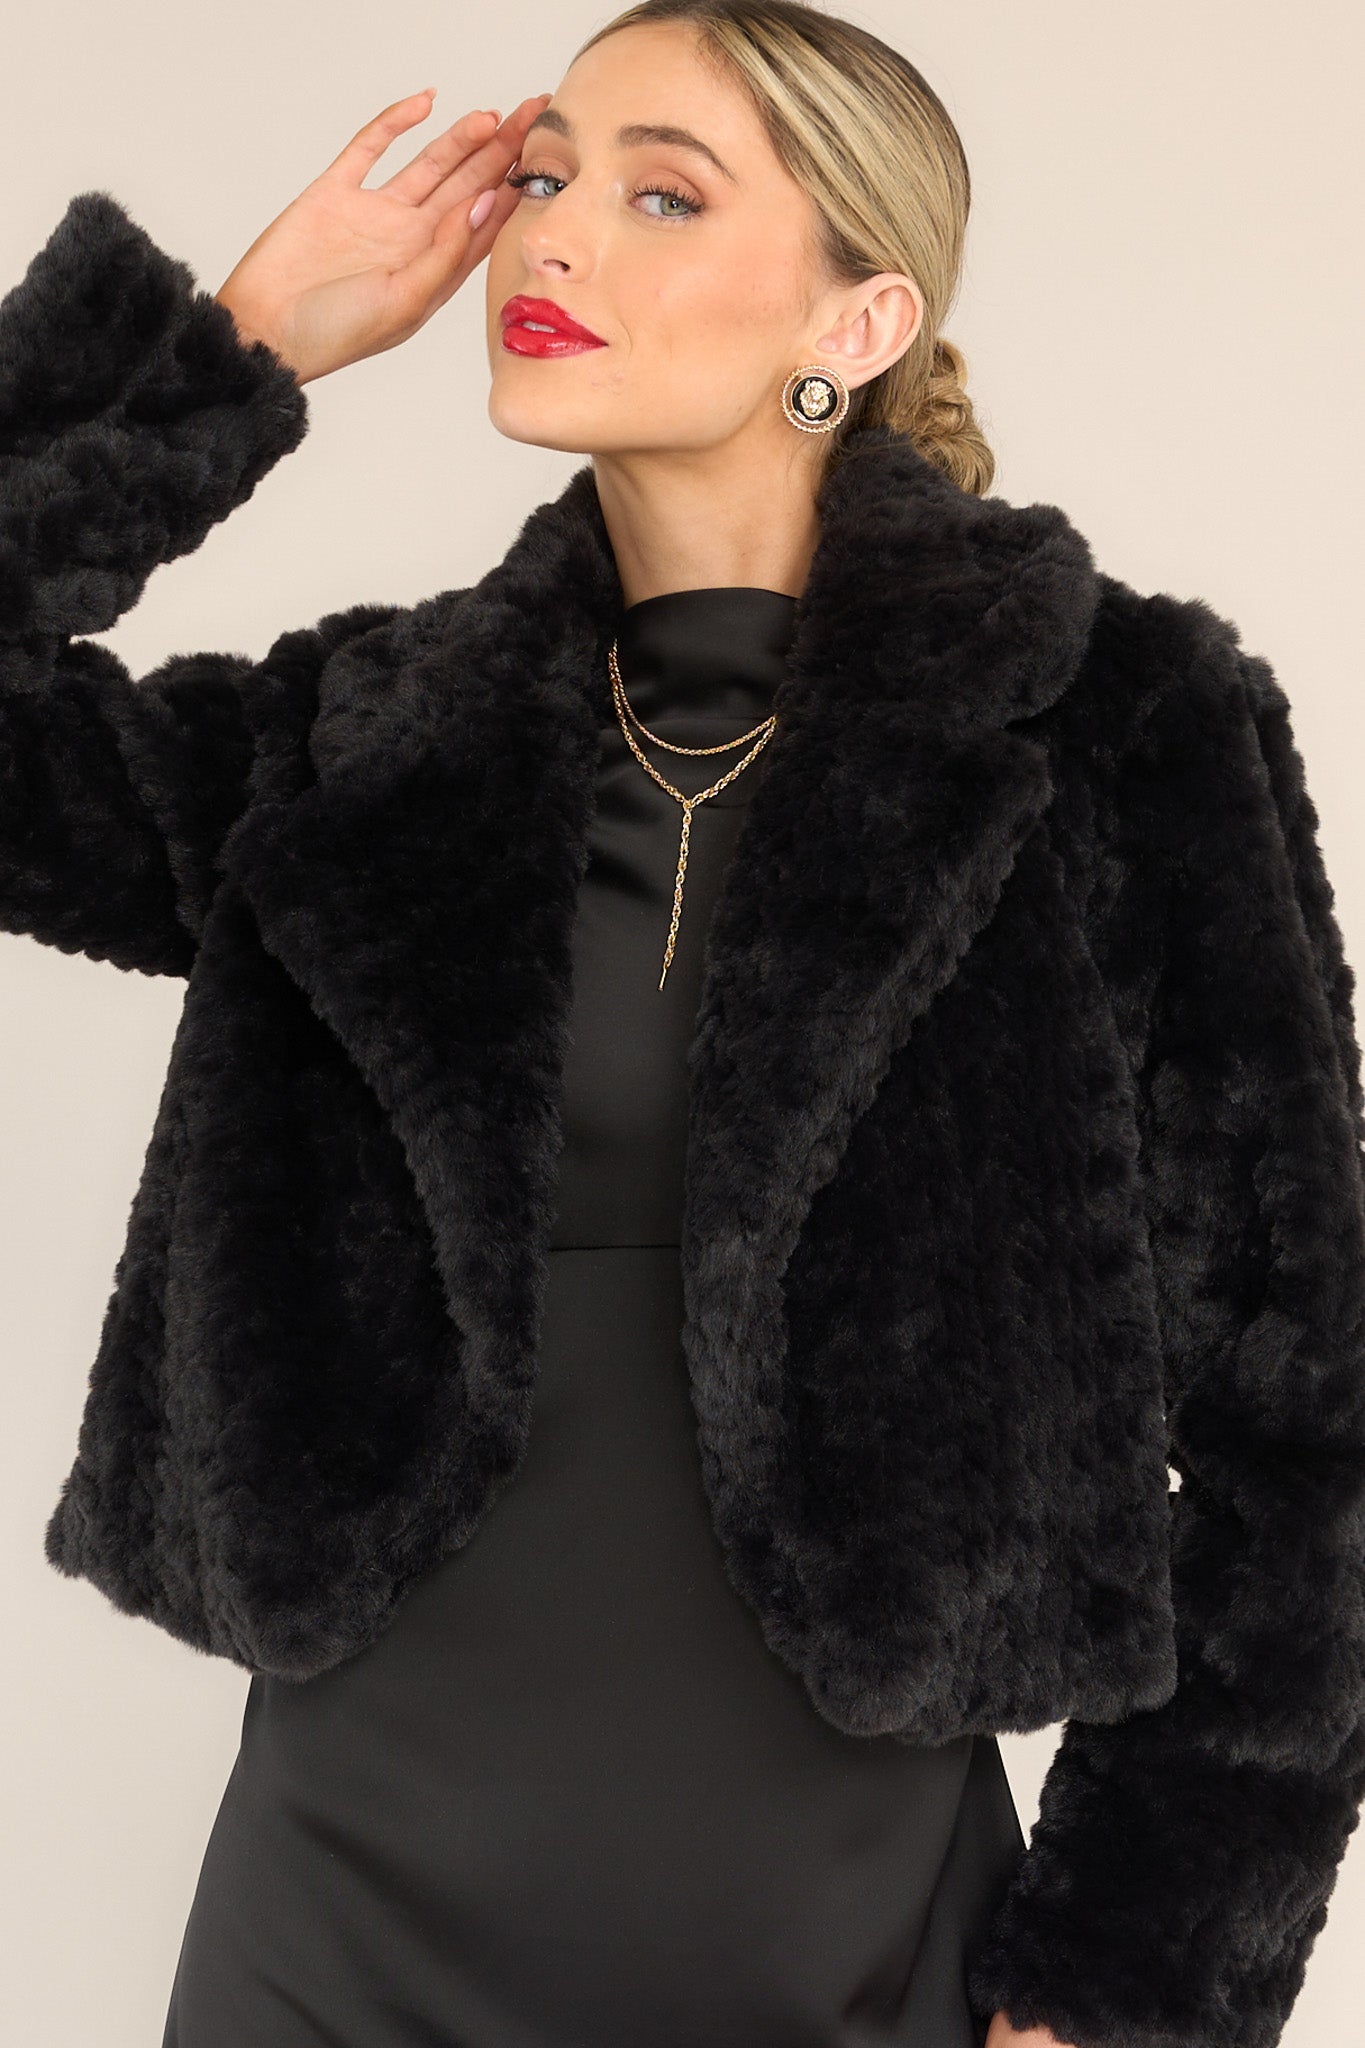 This black faux fur jacket features a folded collar.